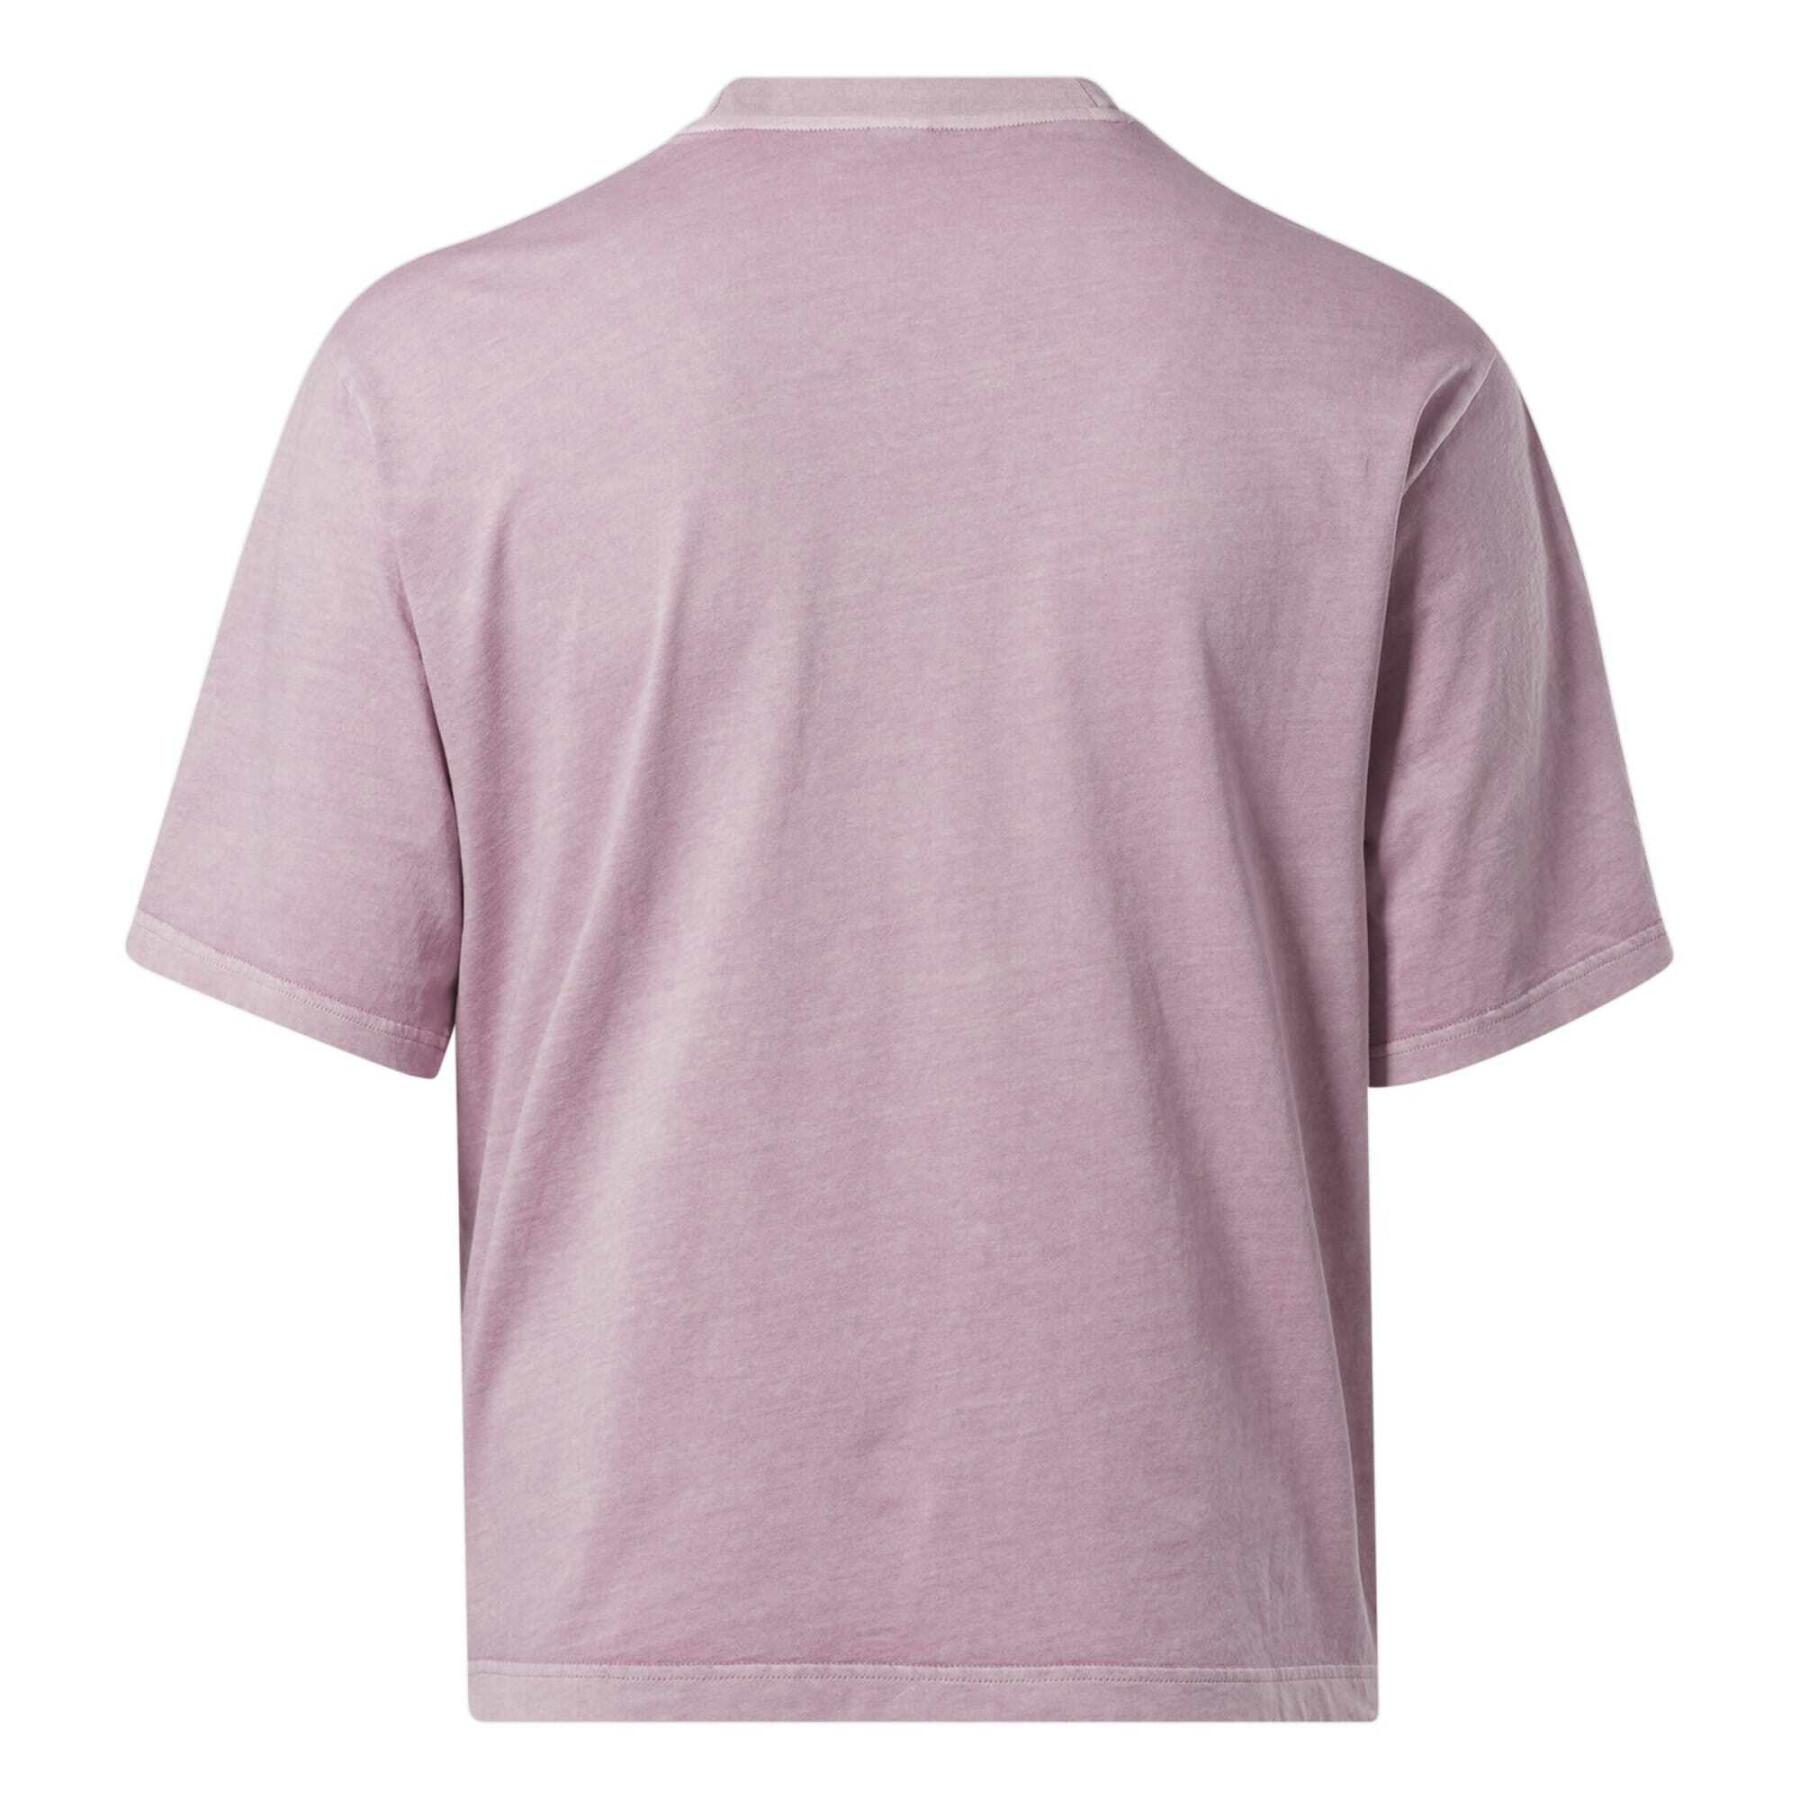 Straight cut T-shirt with natural dye for women Reebok Classics GT